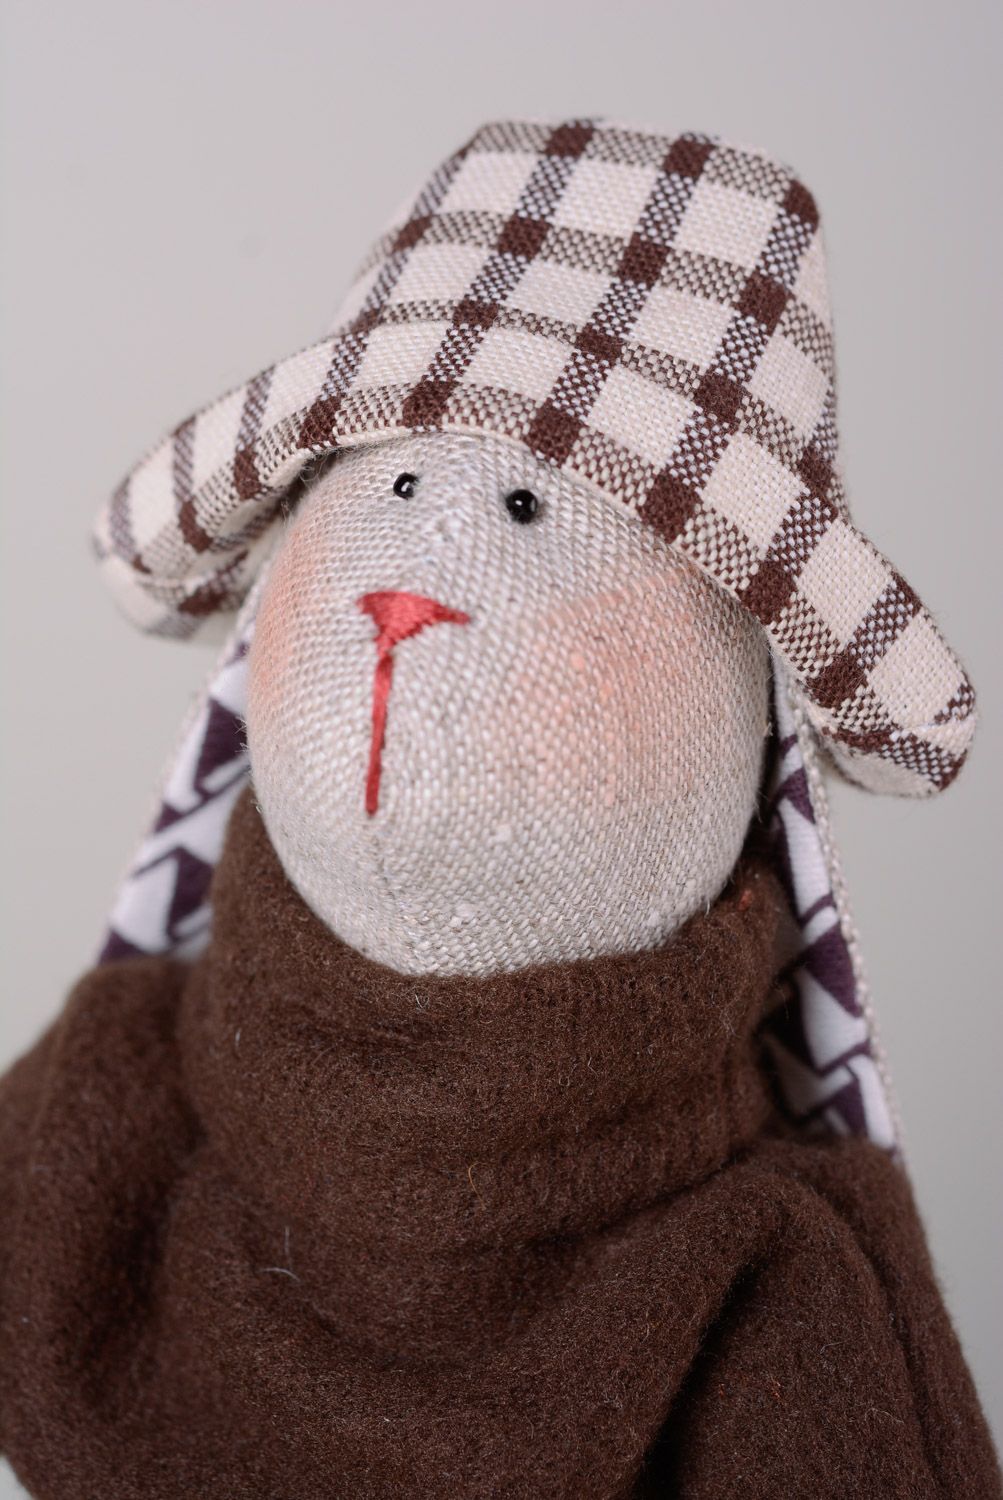 Handmade soft toy sewn of linen and fleece rabbit in checkered suit and hat photo 2